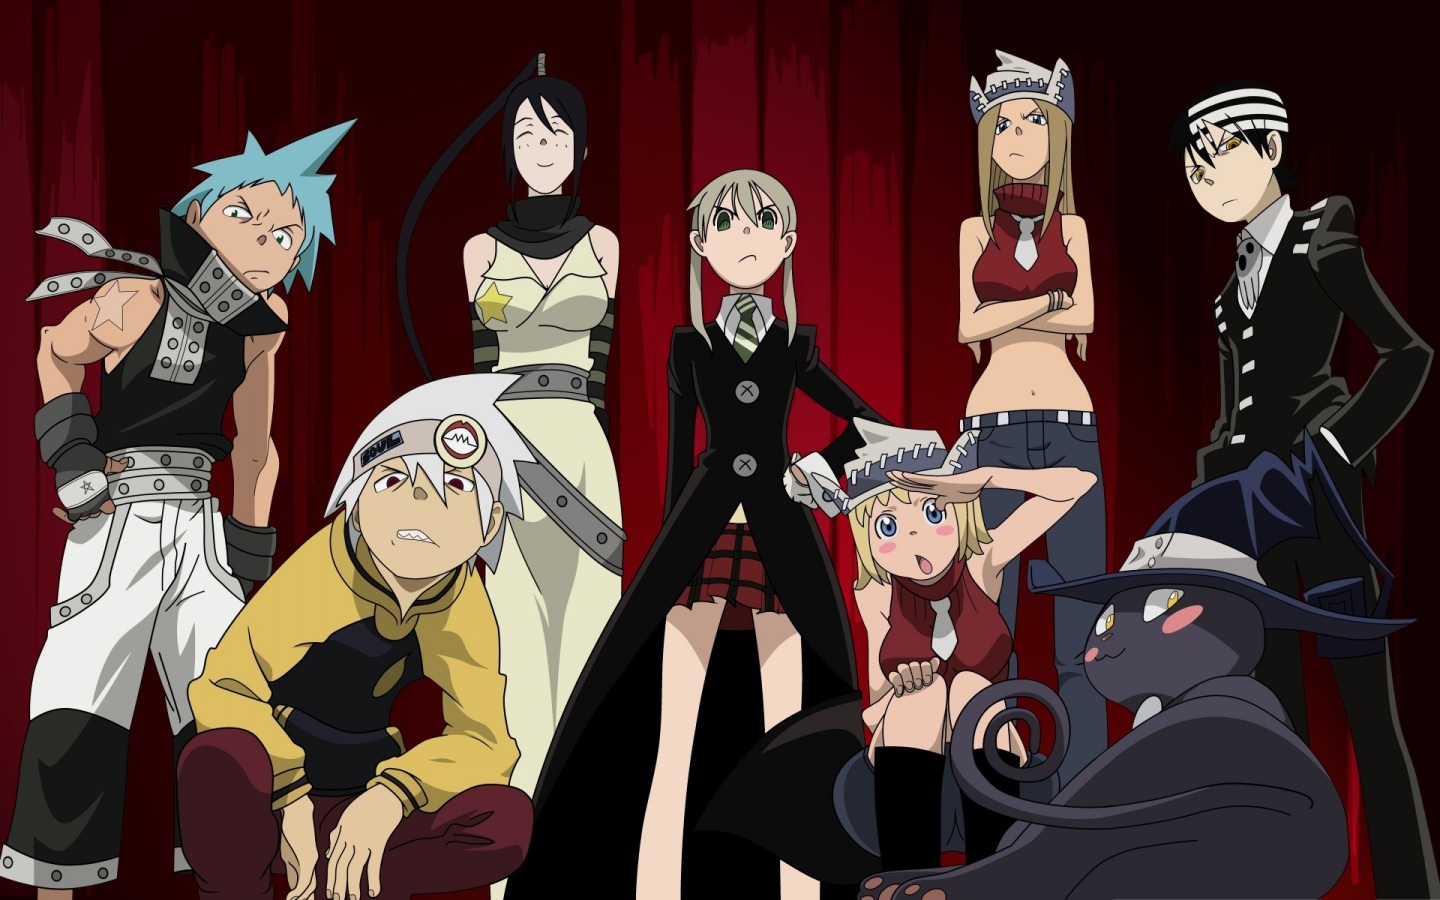 2. "Soul Eater Anime Tattoos" - wide 6